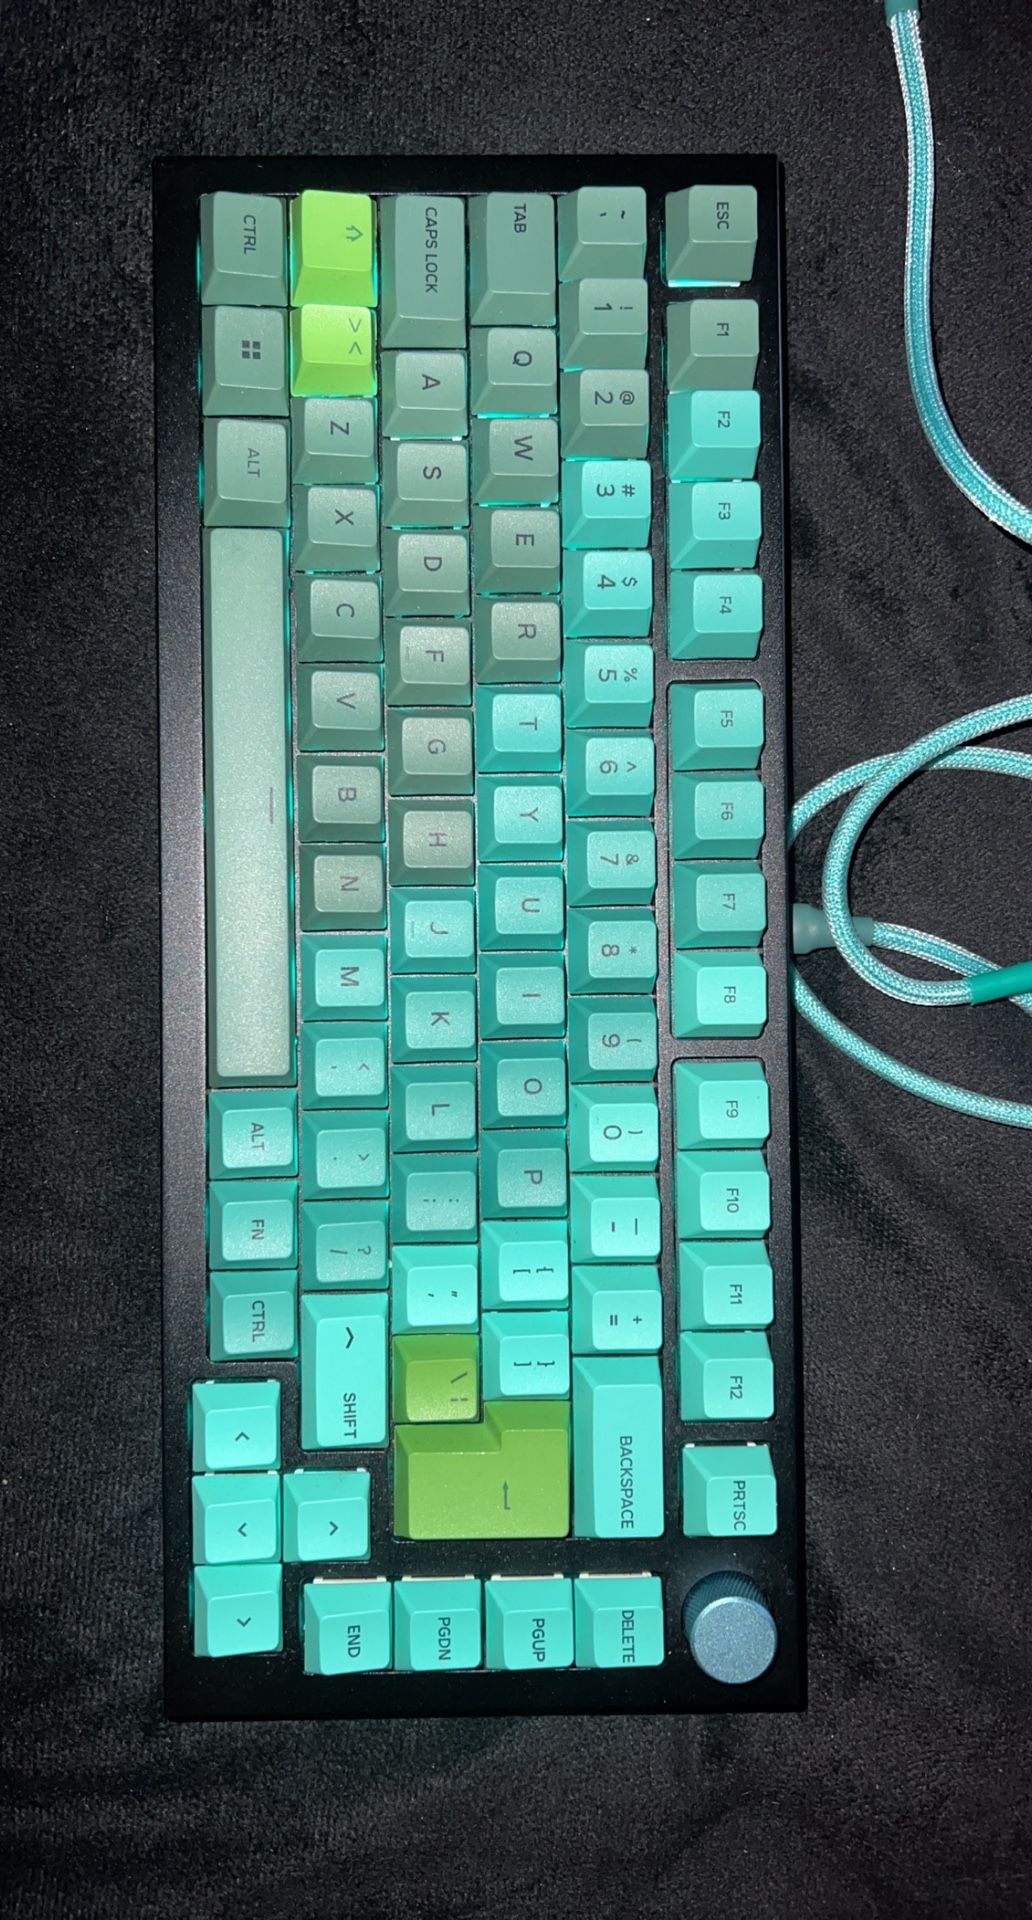 Glorious Gmmk Pro Keyboard W/ Lubed Switches, Coiled Cable Cord, Glorious Wooden Wrist Rest & Etc